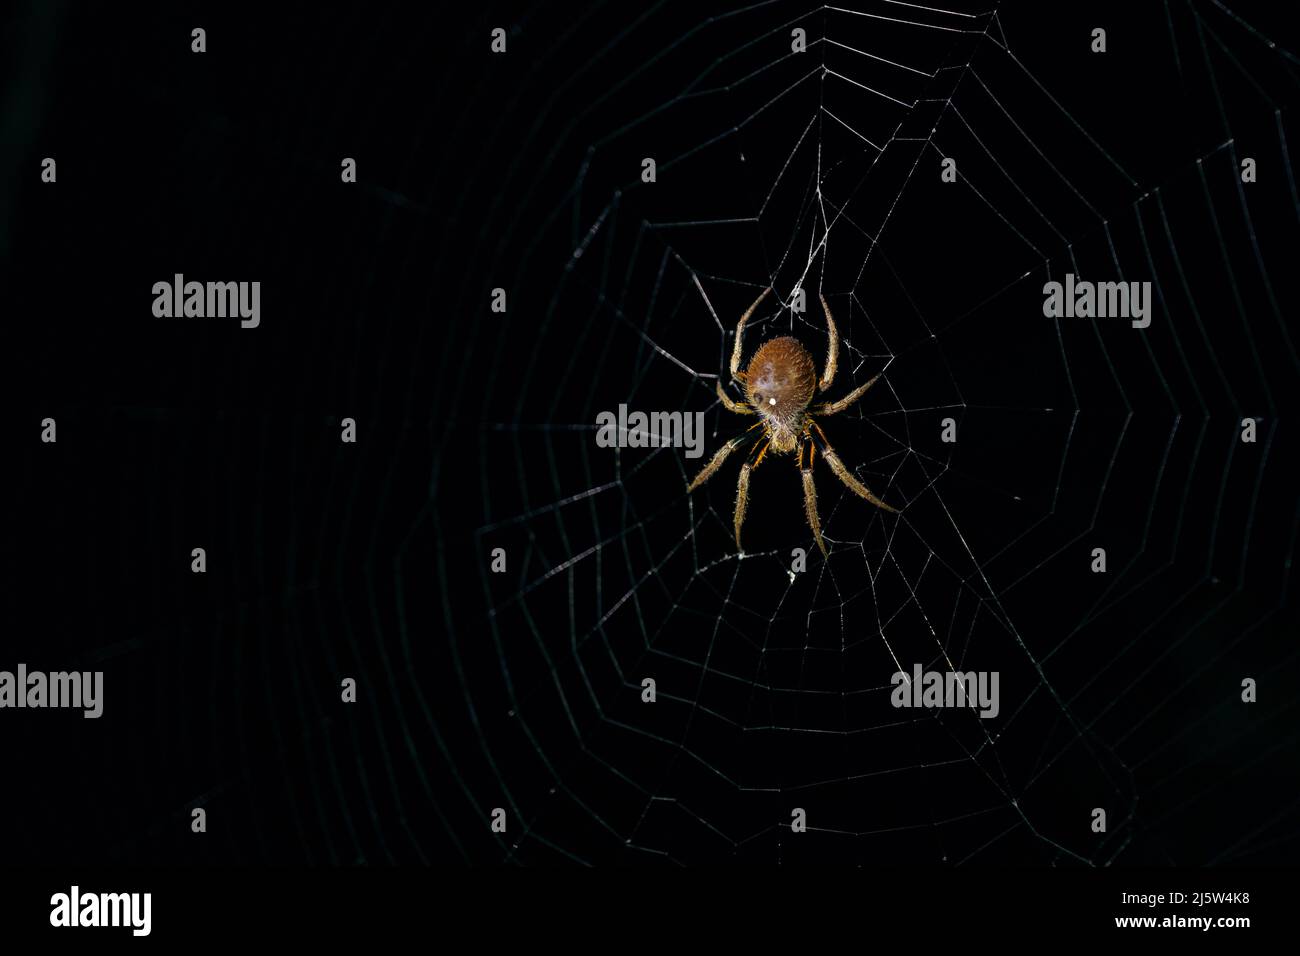 Golden orb spider in their web at night Stock Photo